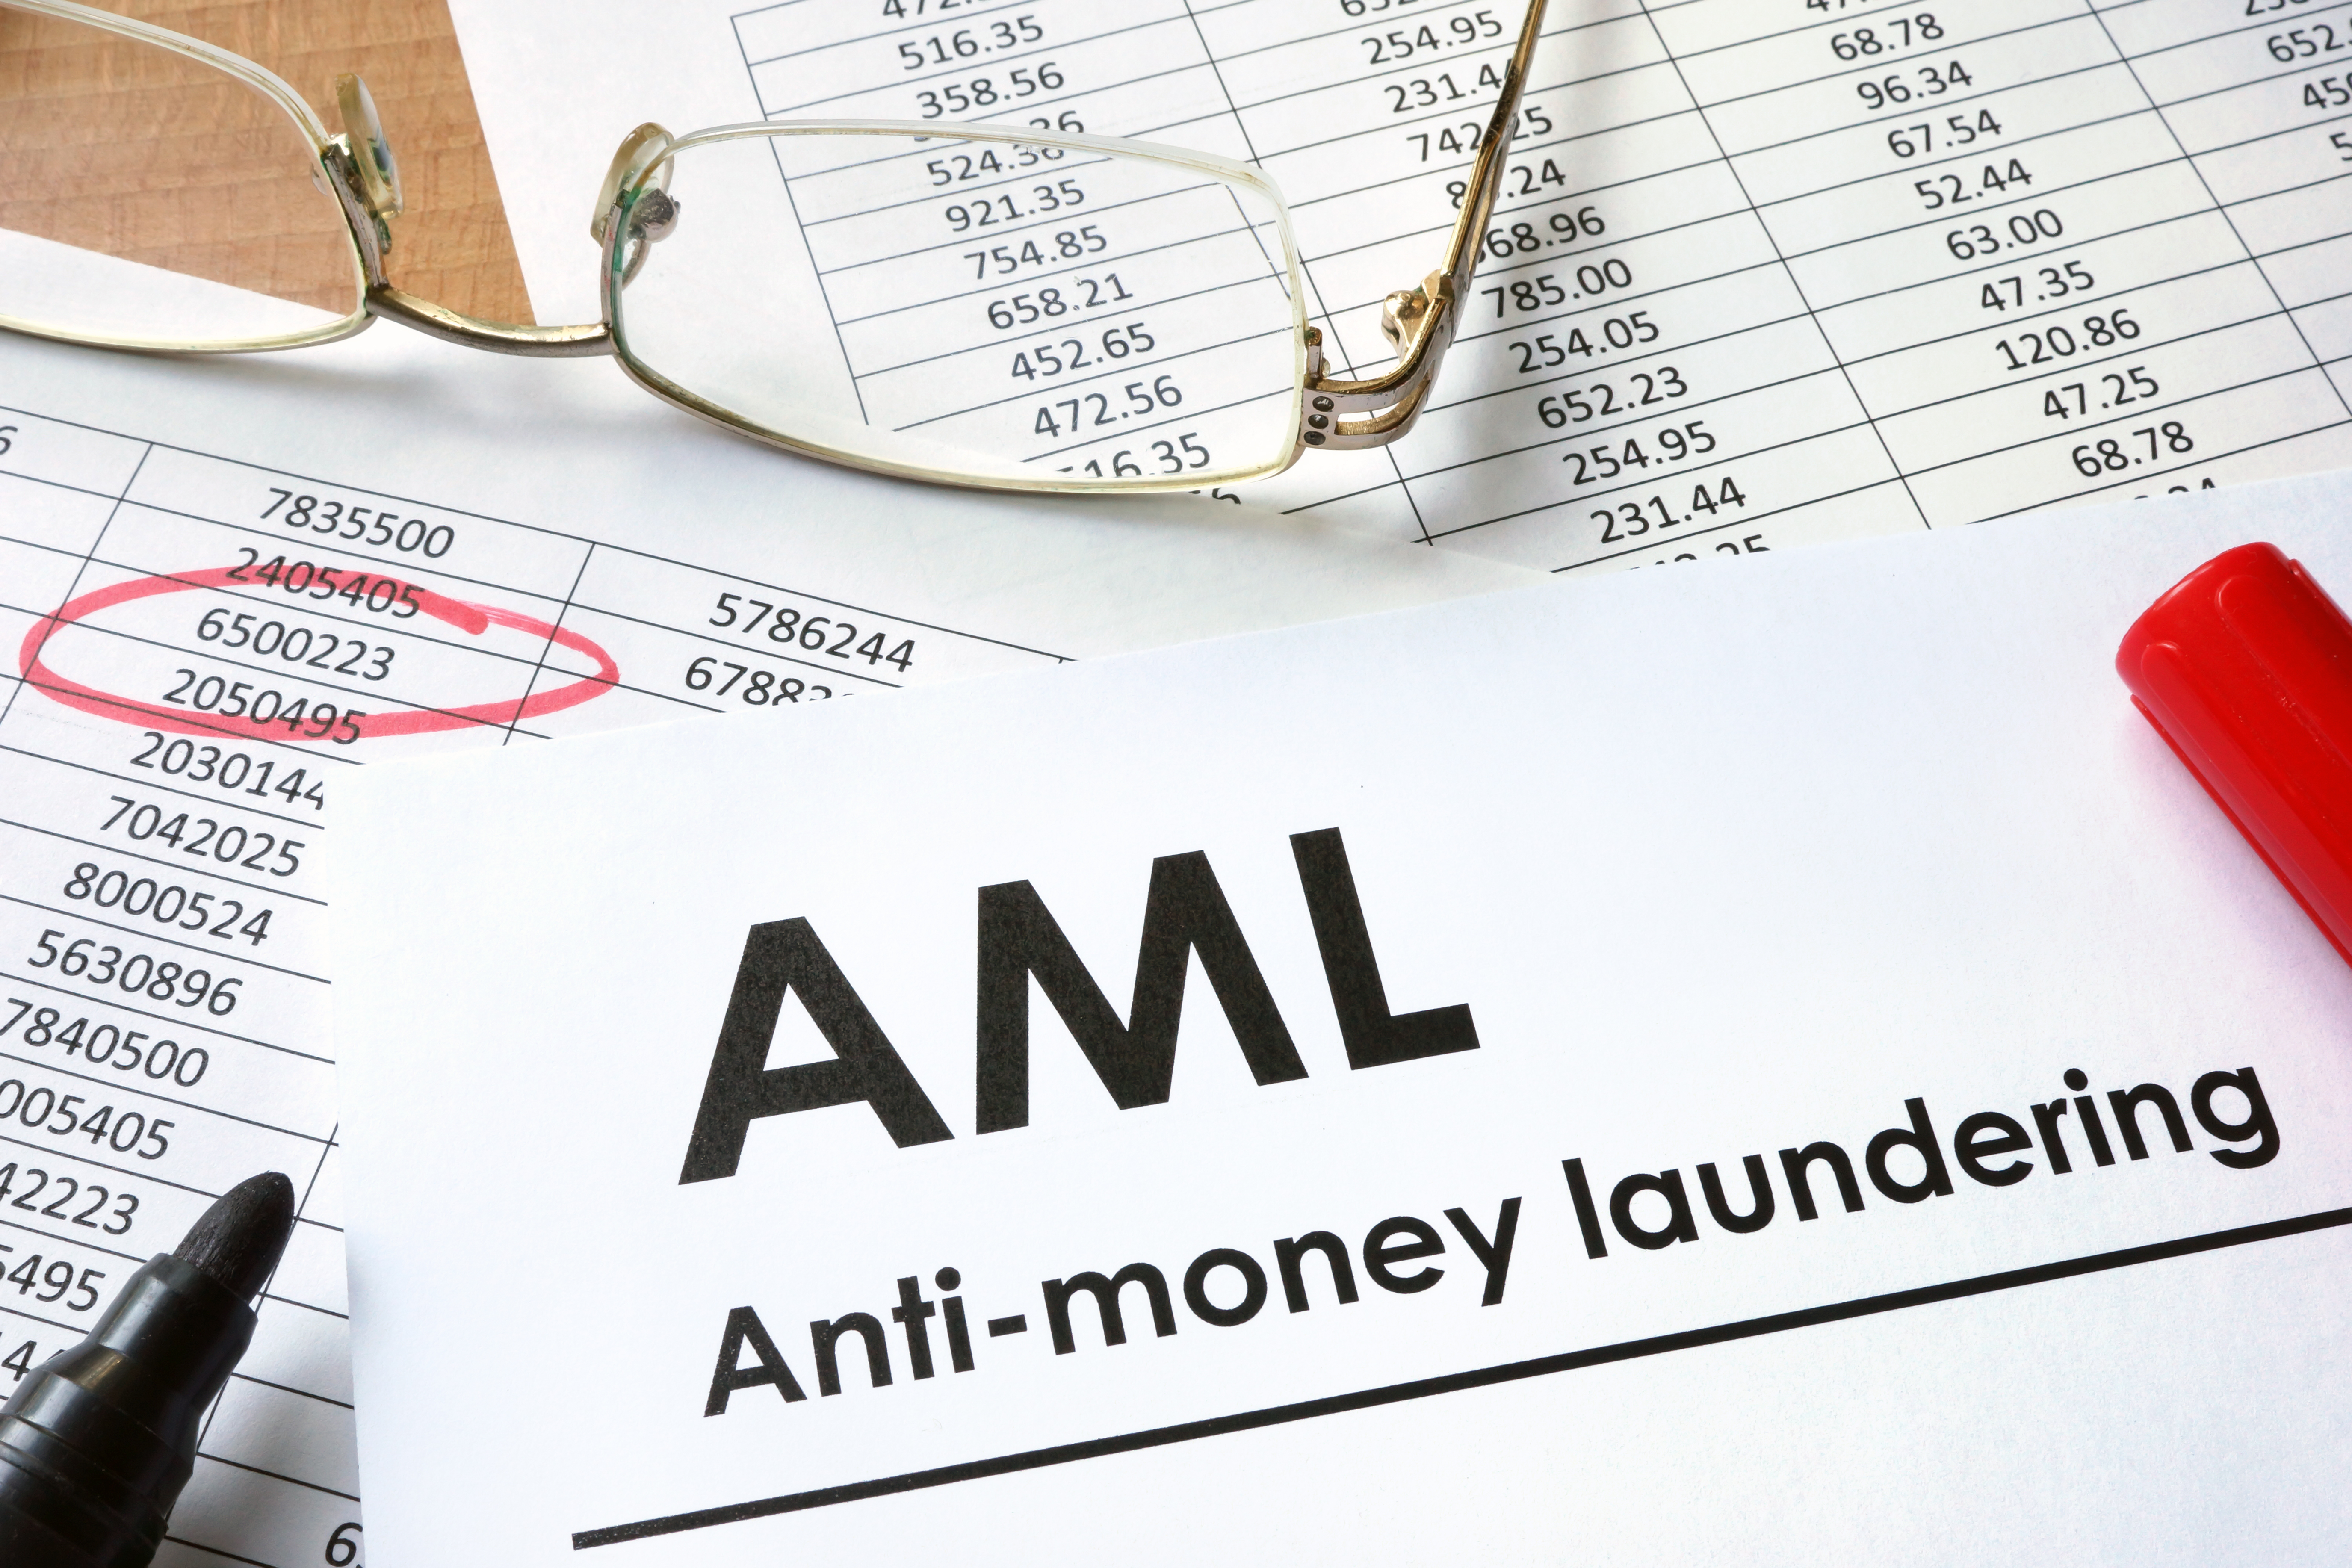 AML courses are available through Datalaw